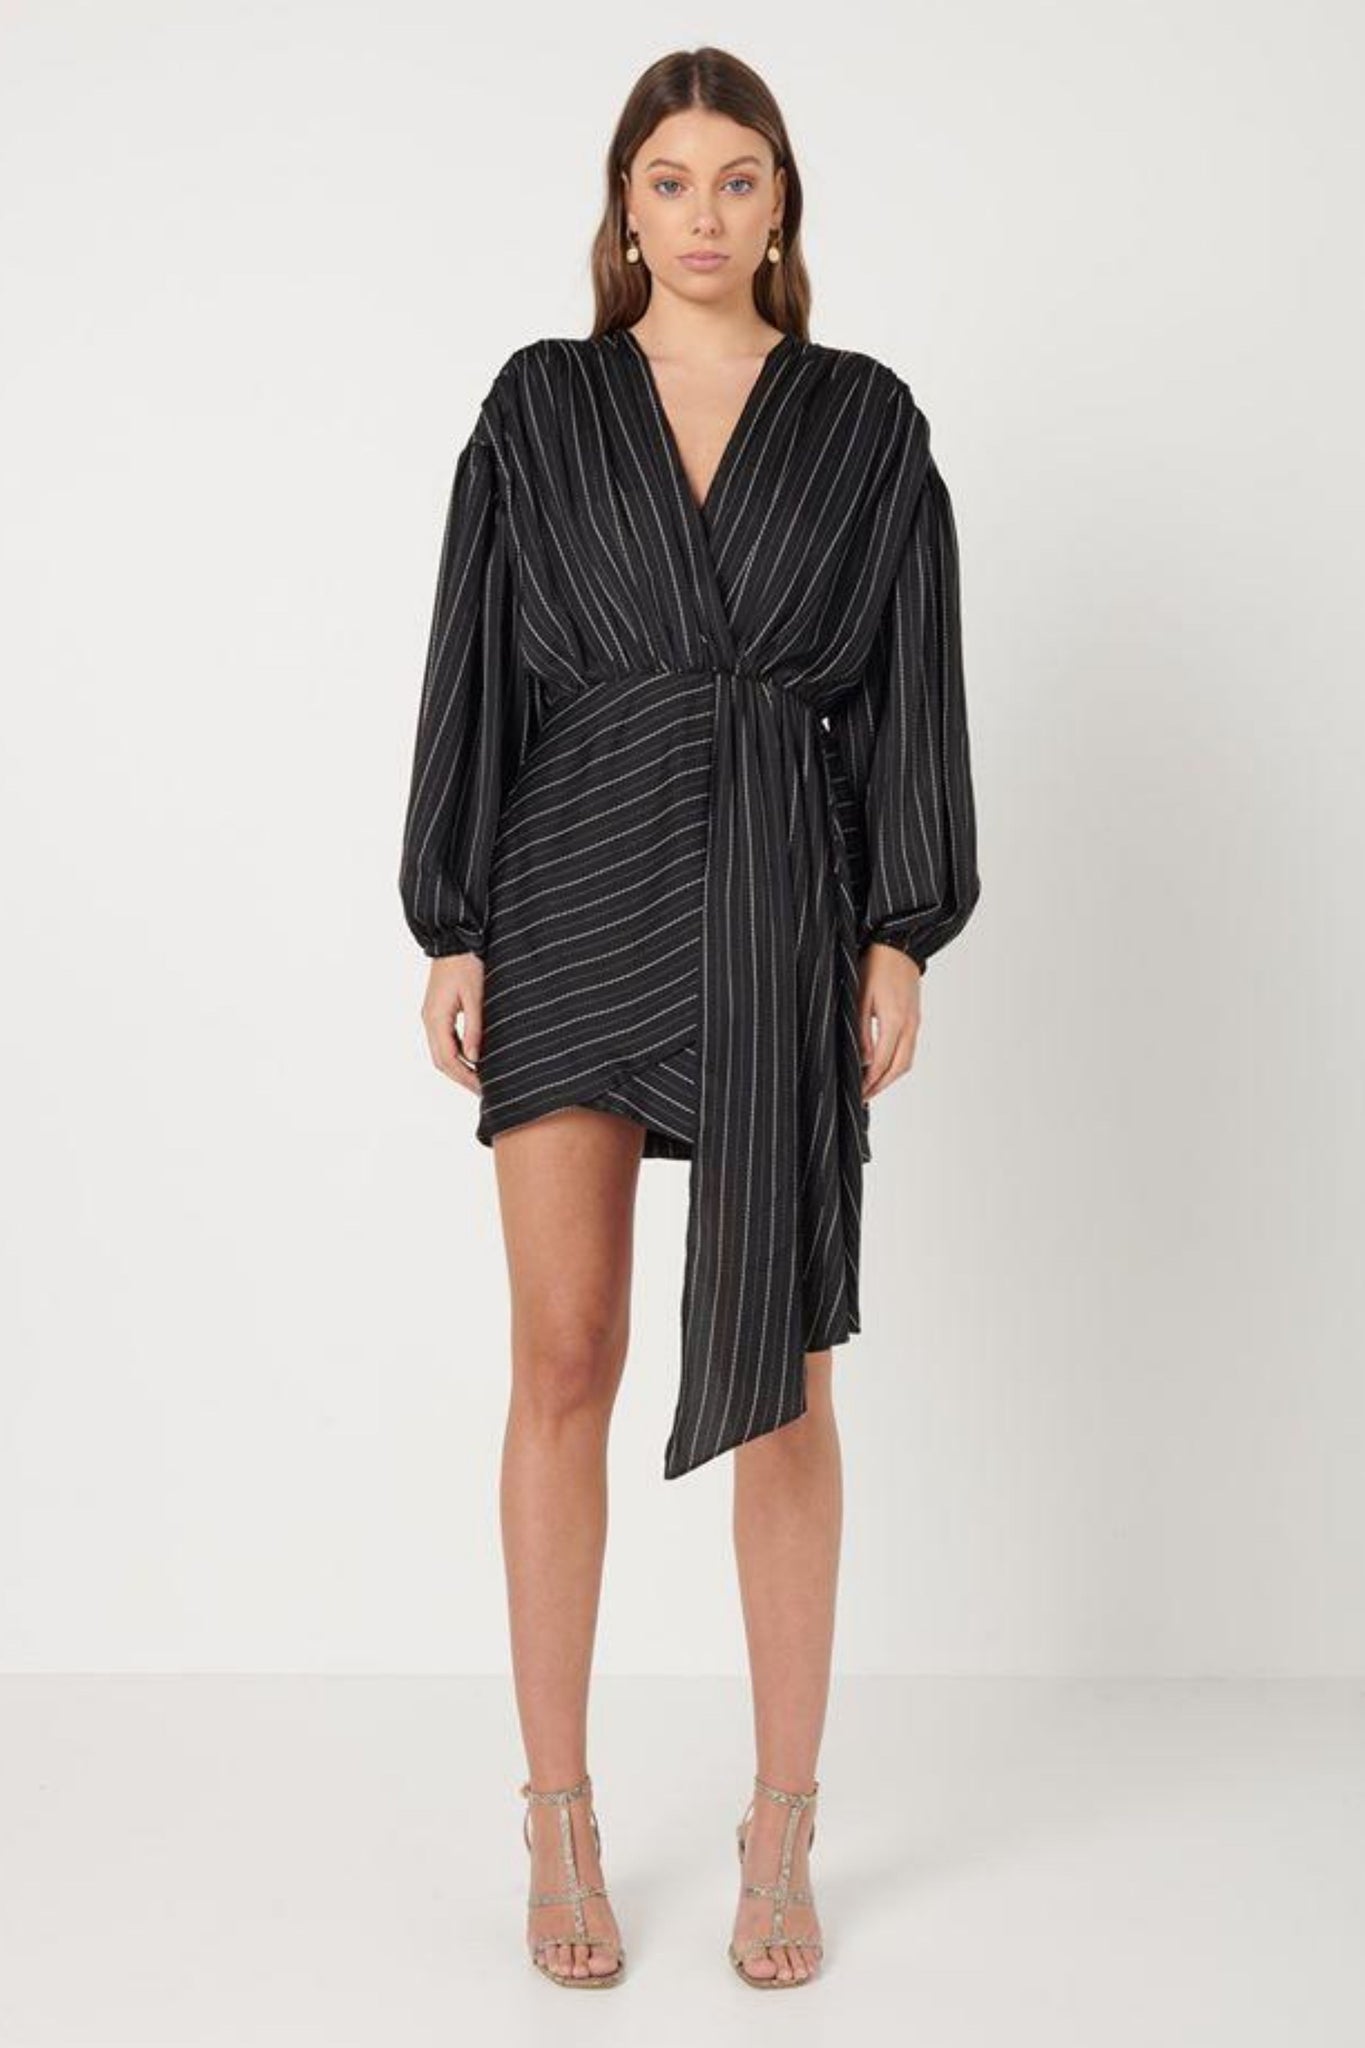 Elliatt Collective Pavilion Mini Dress in black and whilte pinstripe. Long Sleeve Black Mini Dress with Faux wrap skirt and plunge neckline. Long fabric drape dress cocktail race dress and wedding guest outfit.